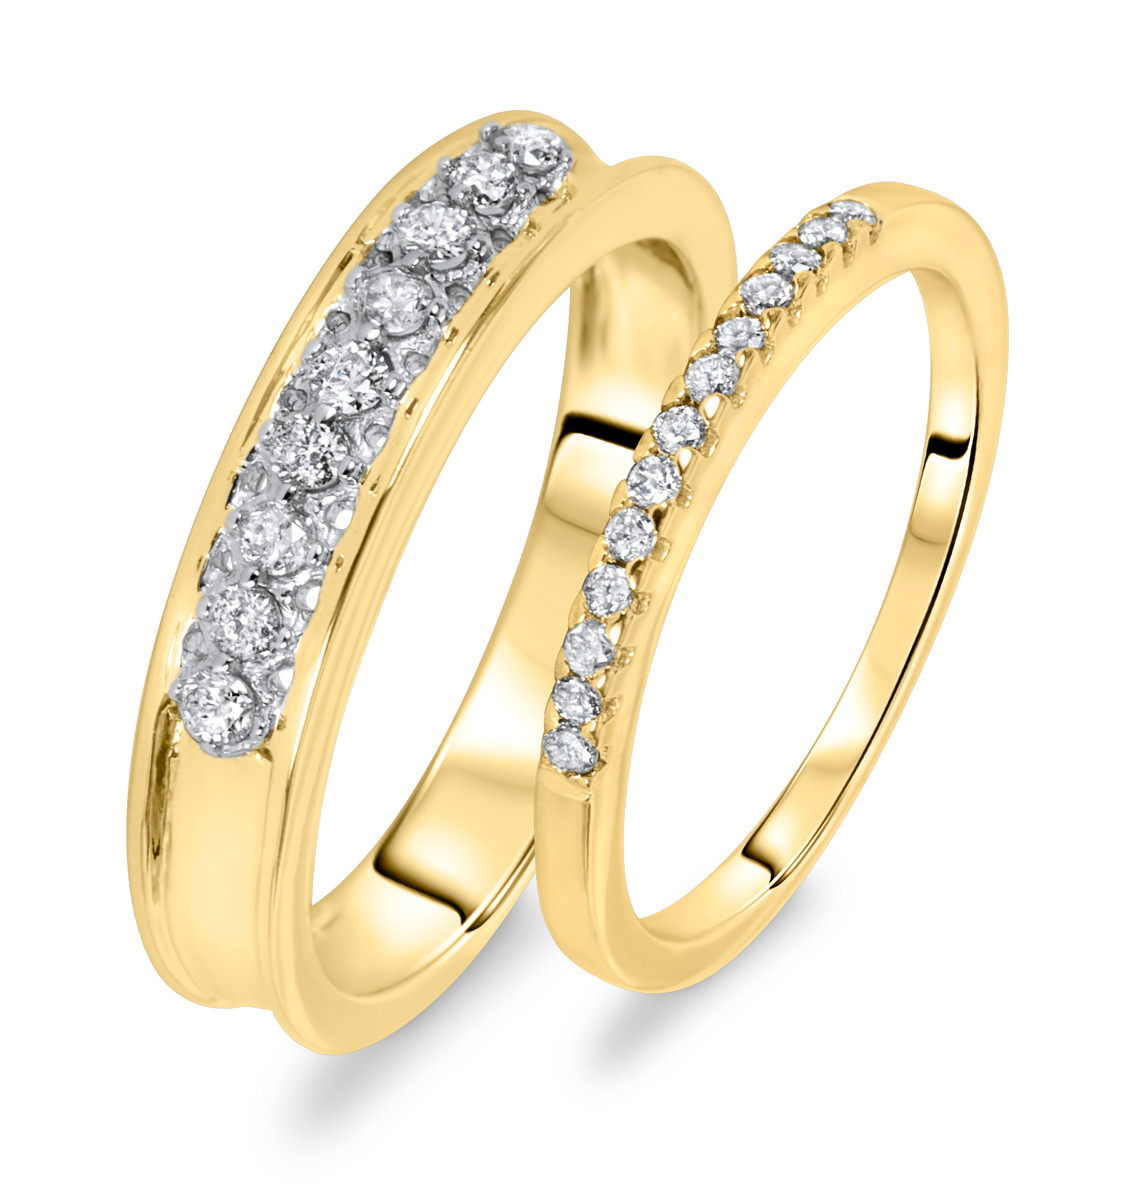 Wedding Ring His And Hers
 3 8 CT T W Diamond His And Hers Wedding Rings 14K Yellow